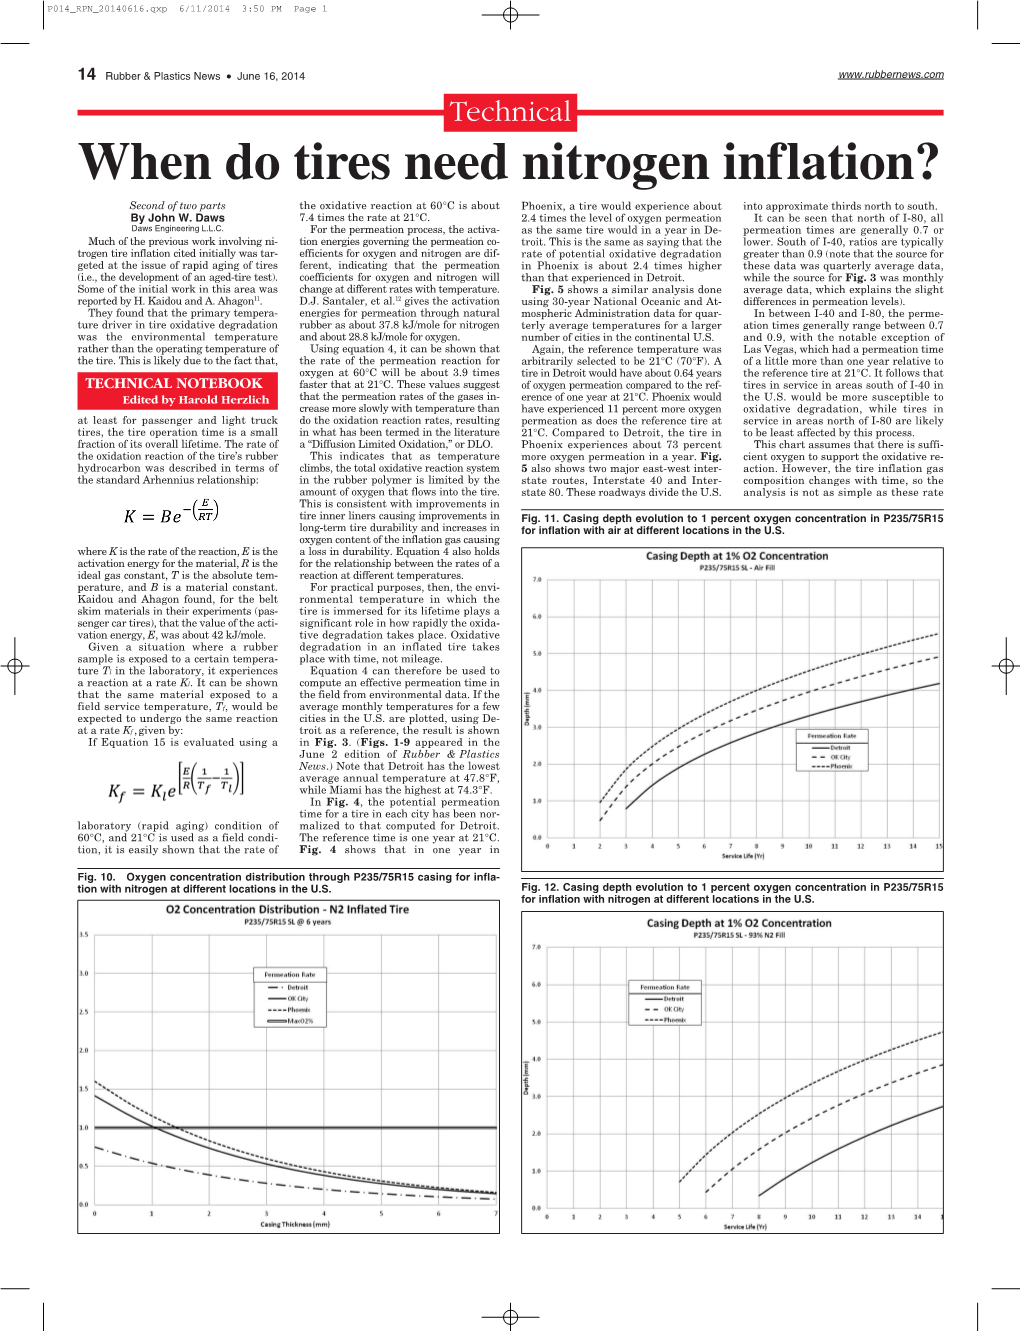 When Do Tires Need Nitrogen Inflation?